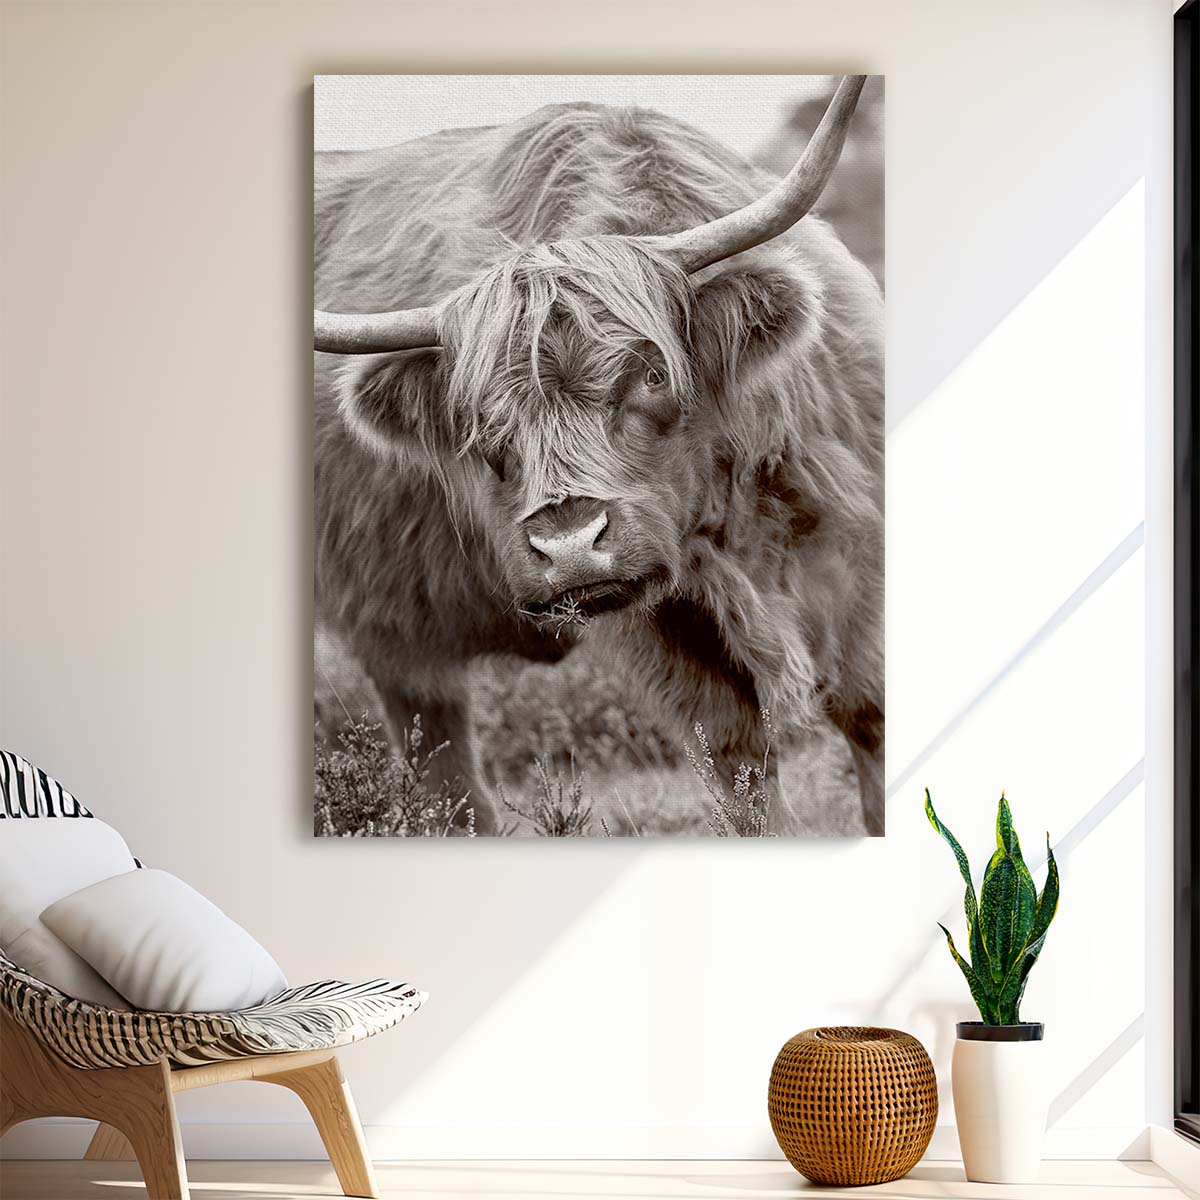 Highland Bull Close-Up Photography Wall Art by Jacky Parker by Luxuriance Designs, made in USA